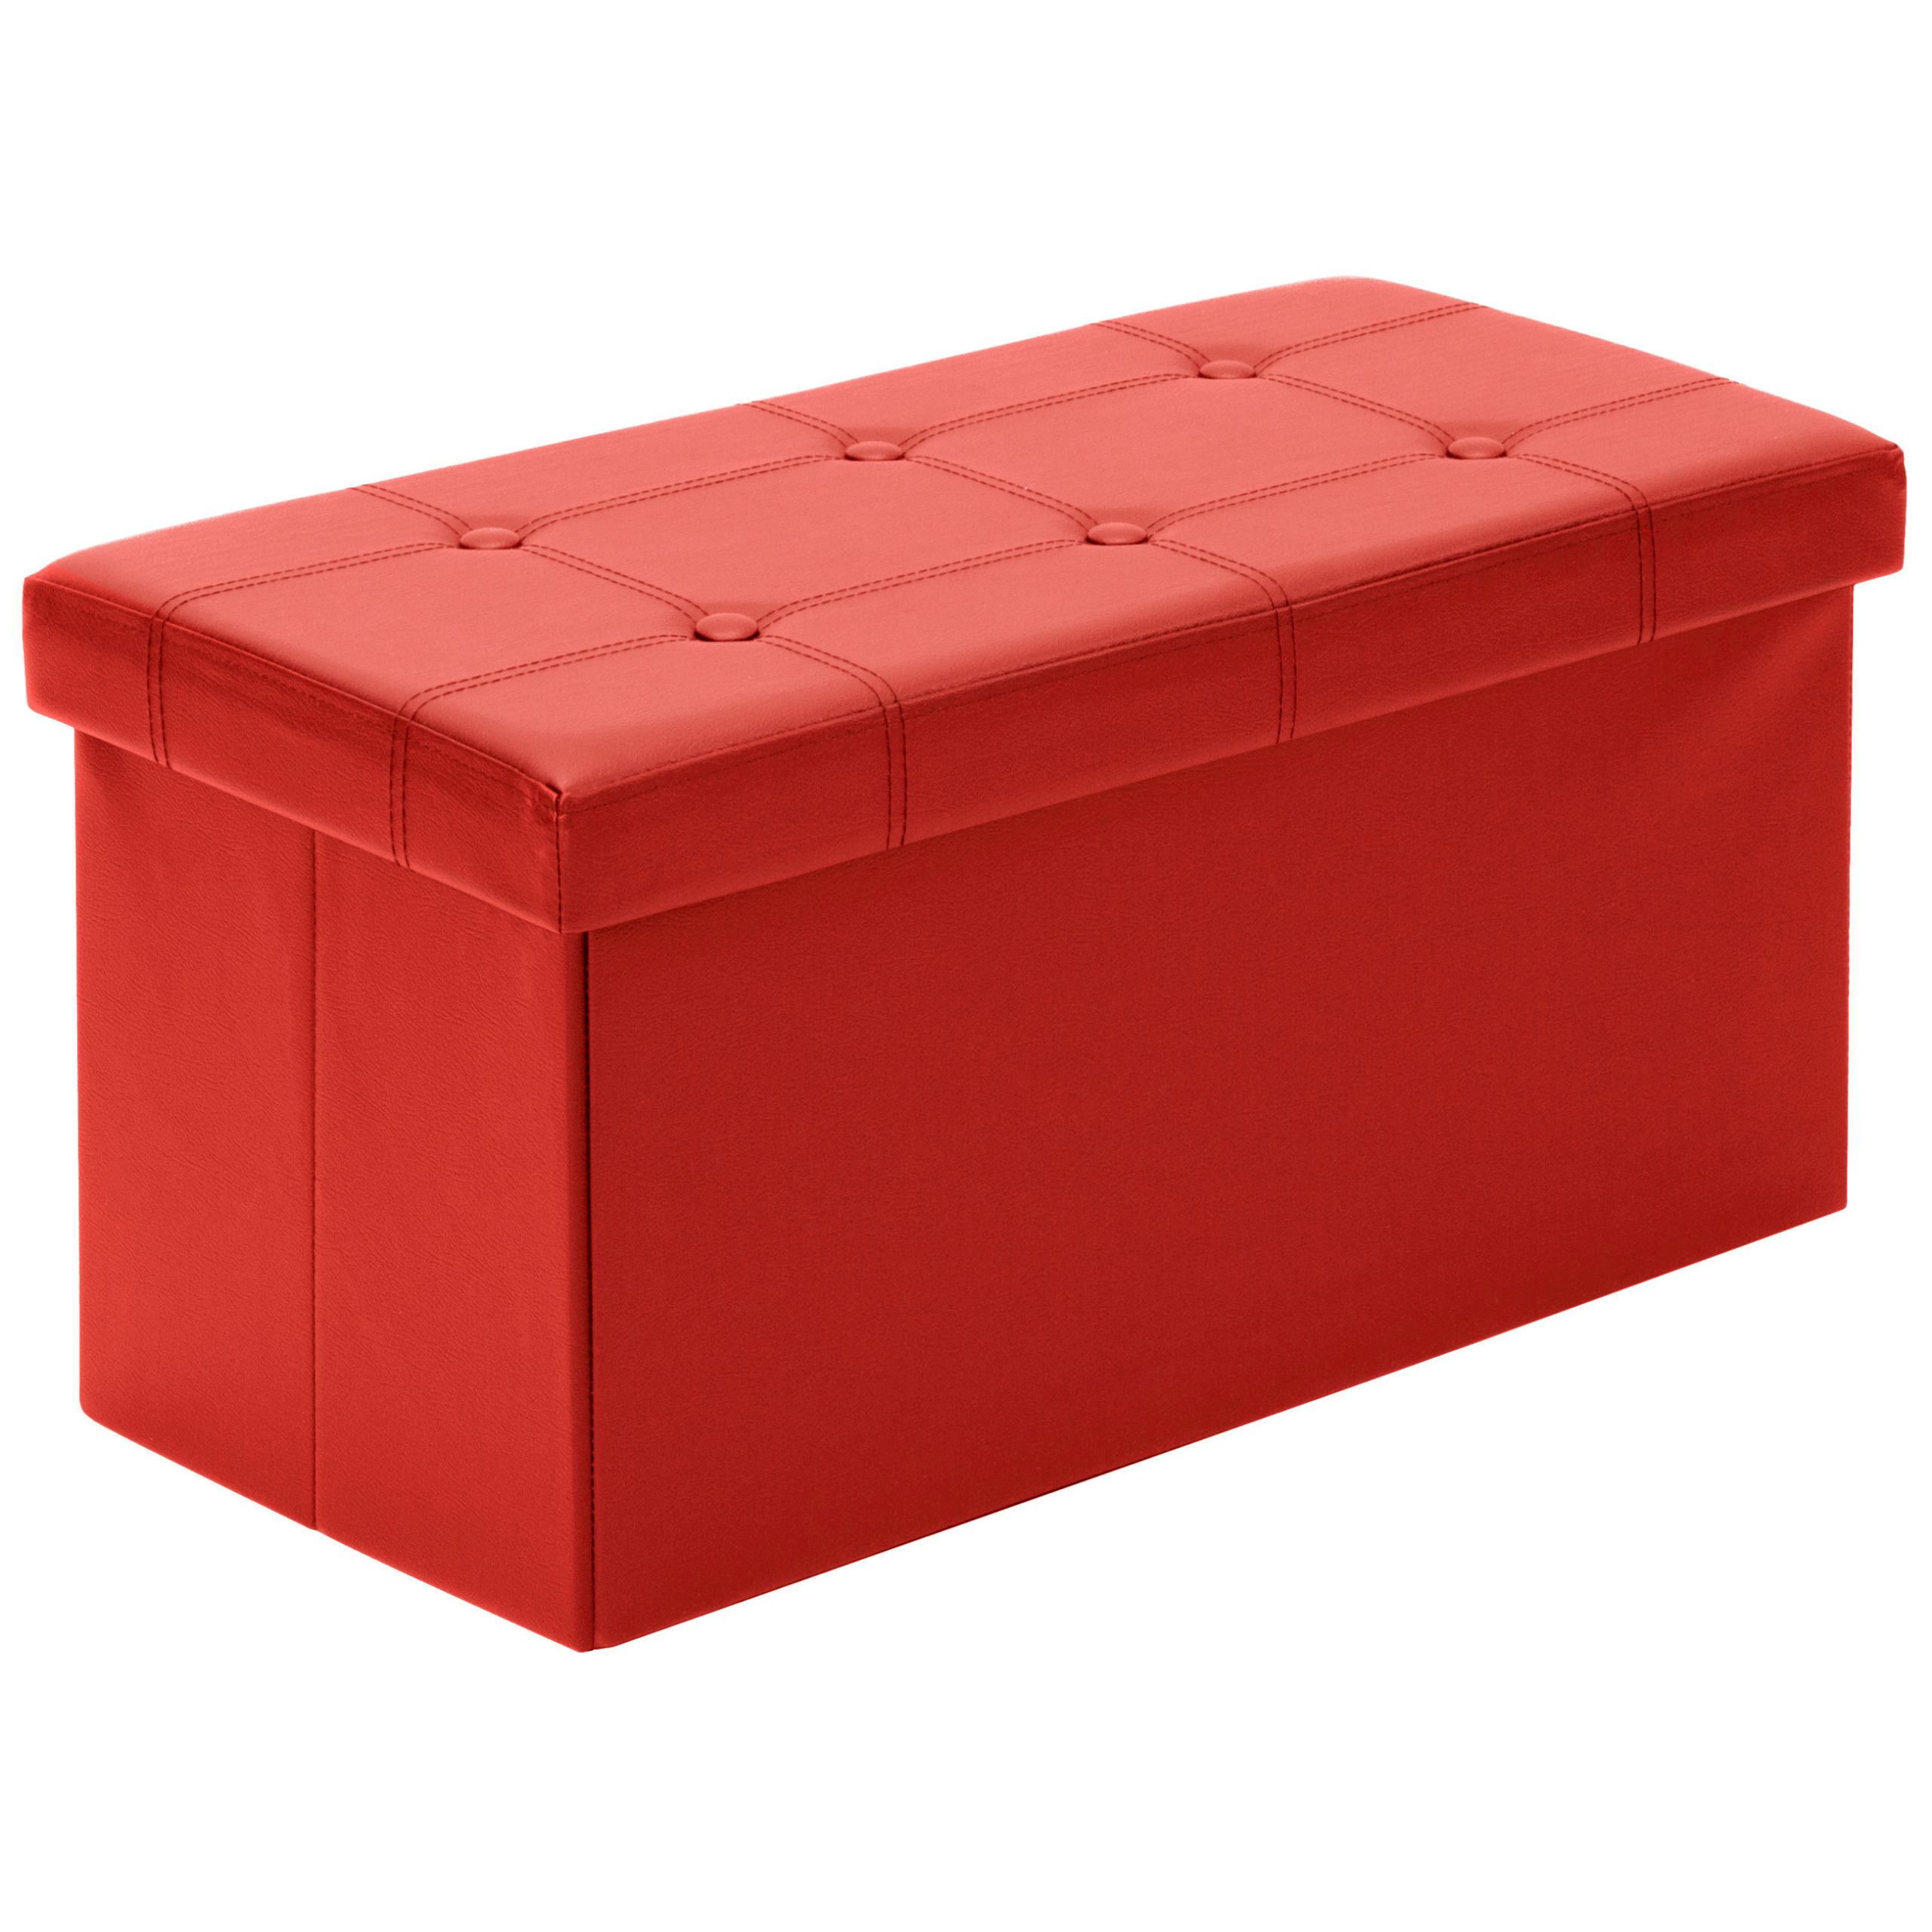 Red Storage Bench
 Best Choice Products Leather Folding Storage Ottoman